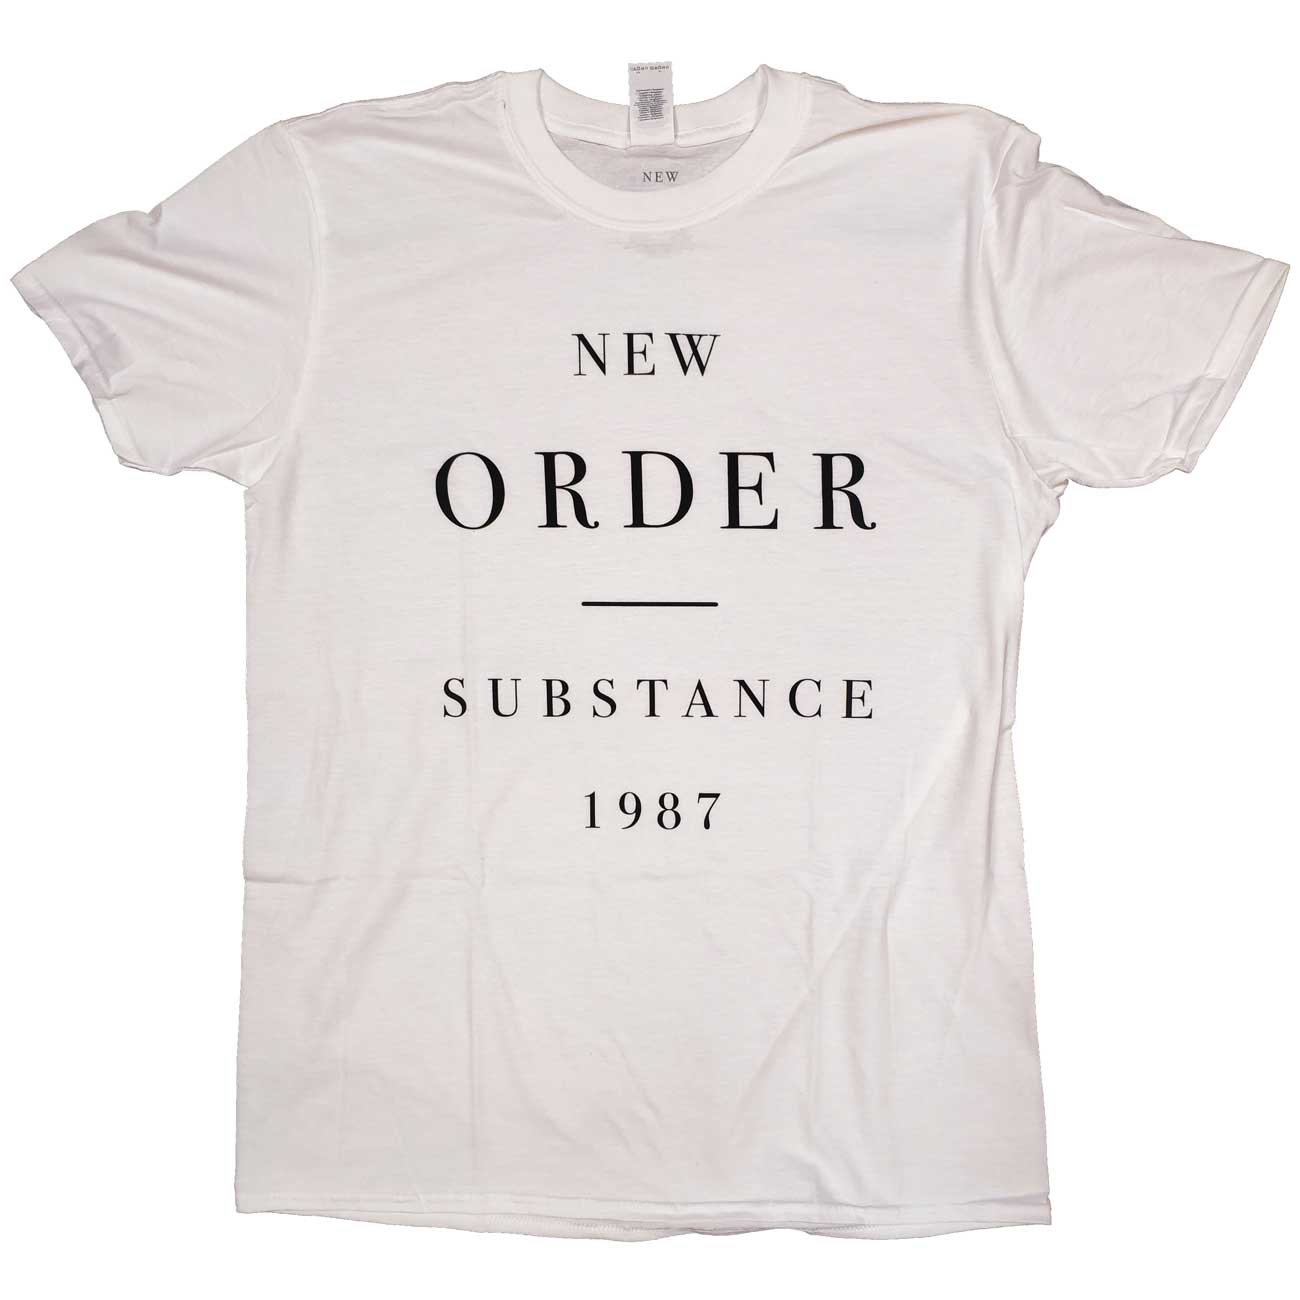 New Order T Shirt - Substance 1987 100% Official